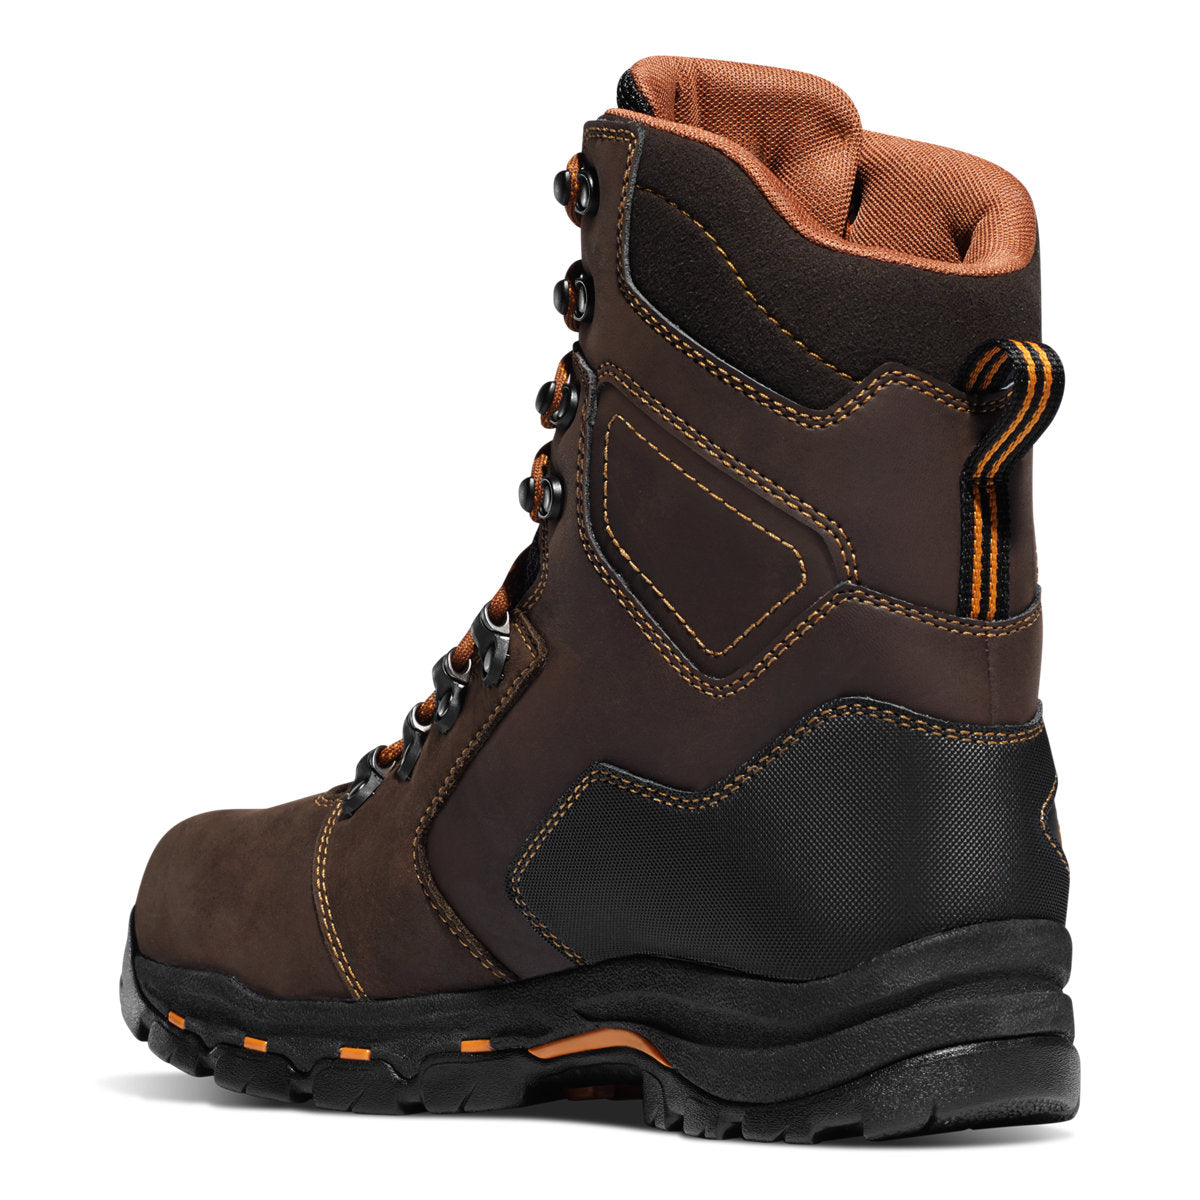 Danner Vicious 8" Safety